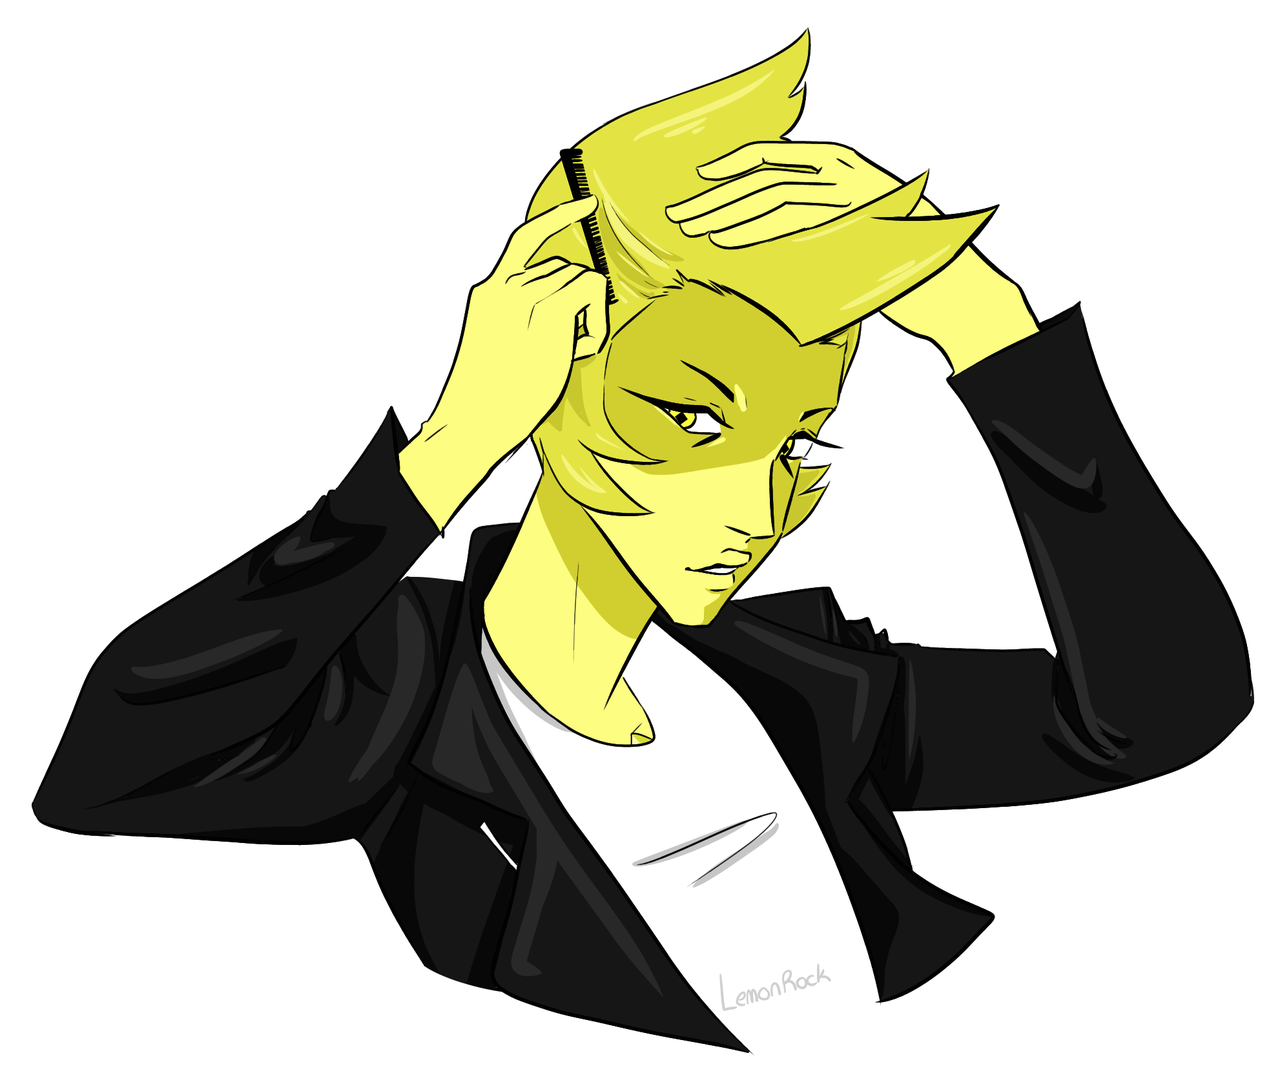 I was doodling and accidentally made yellow look like a greaser so I just rolled with it